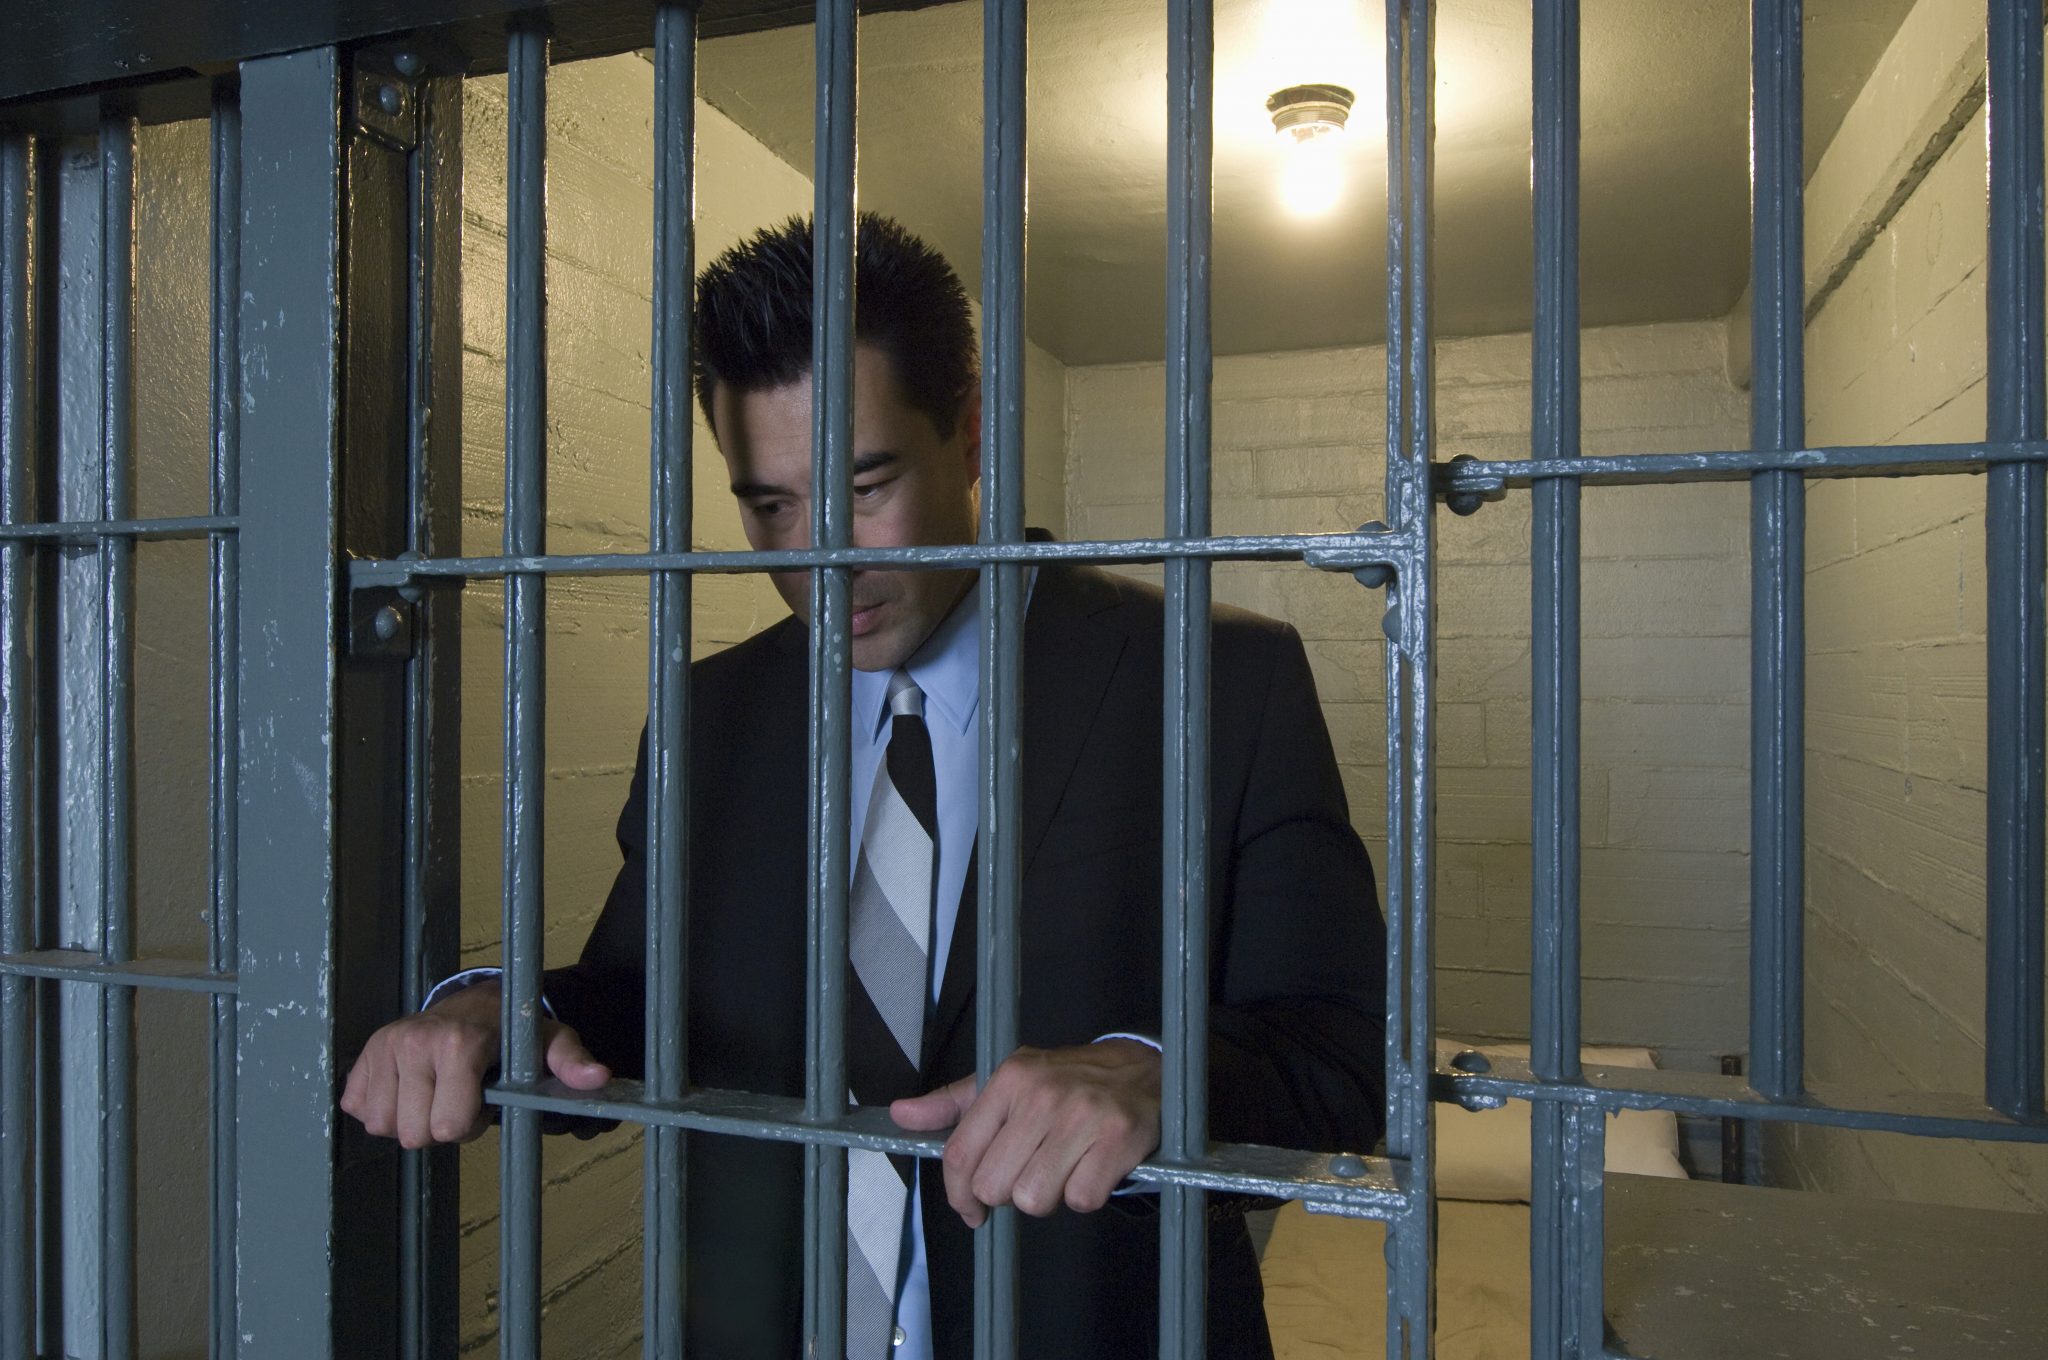 A middle aged business man standing behind bars